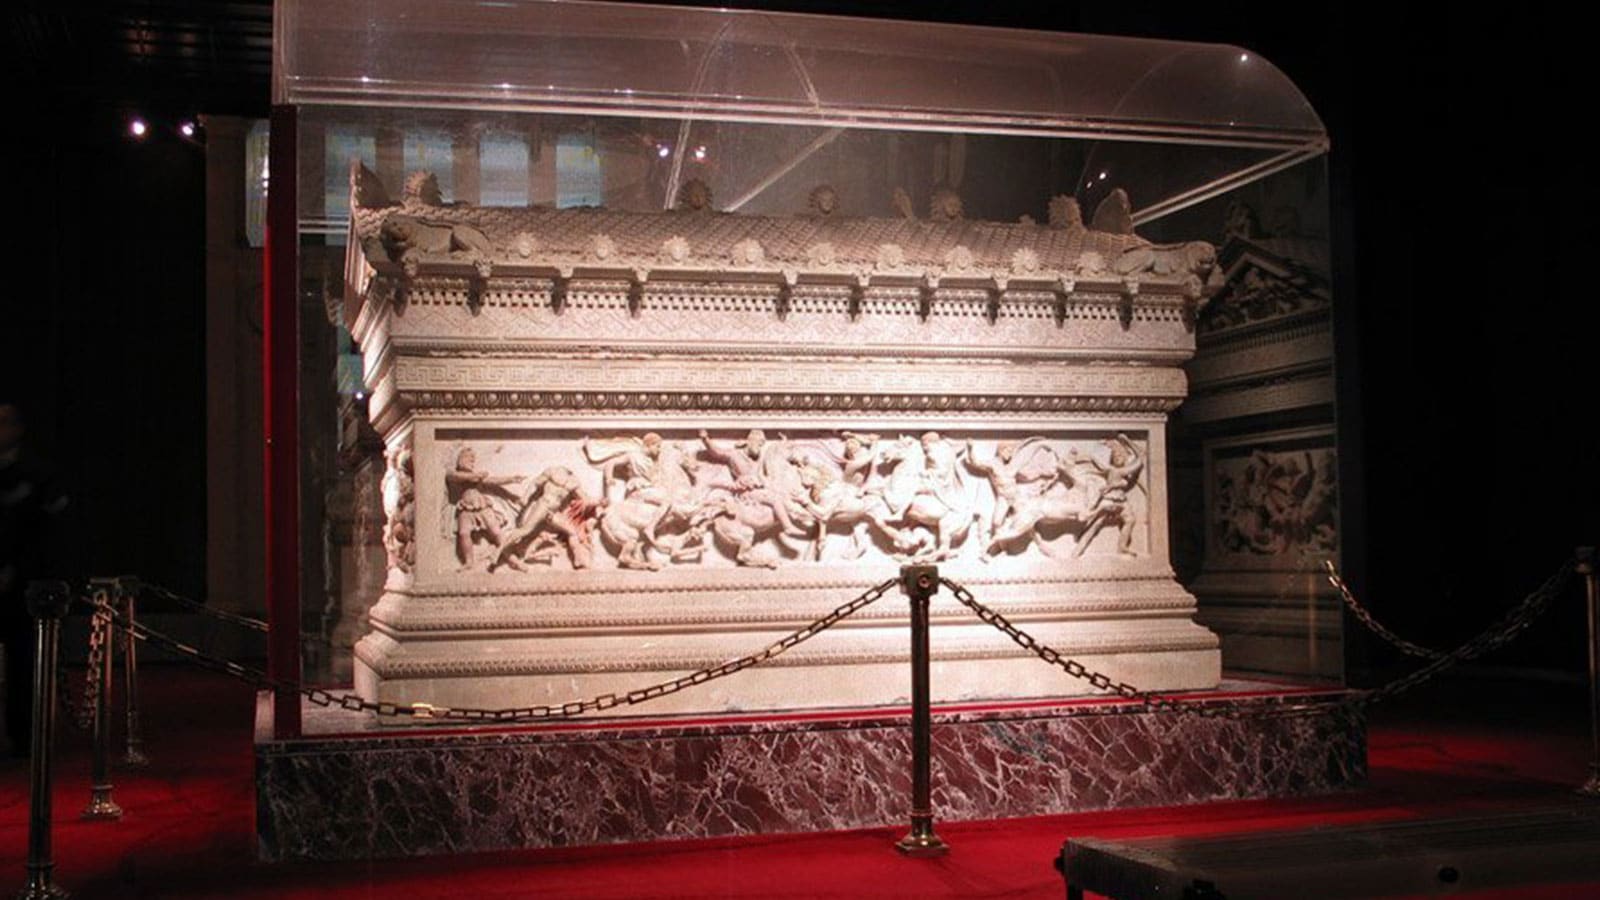 Alexander The Great's Sarcophagus in Istanbul